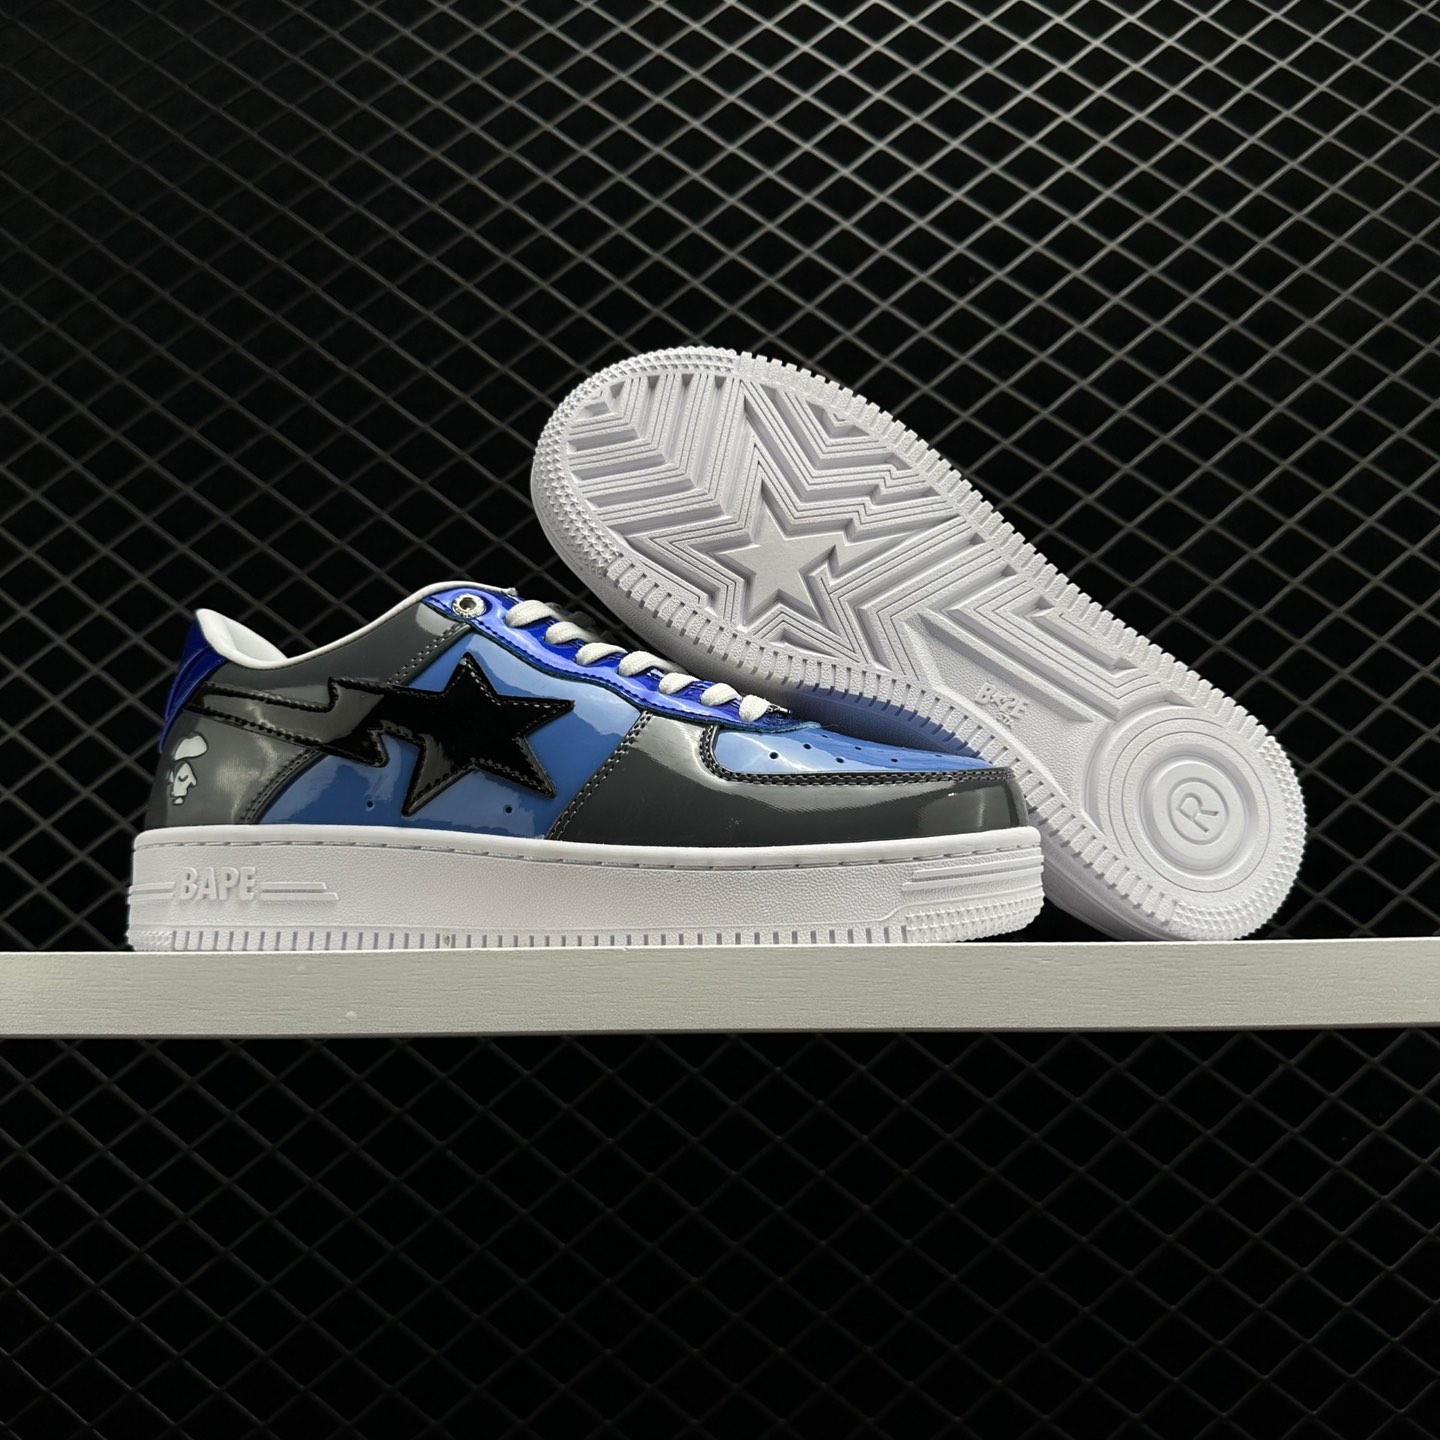 A Bathing Ape Bape Sta Low Navy Color Combo - Trendy Sneakers for Stylish Looks